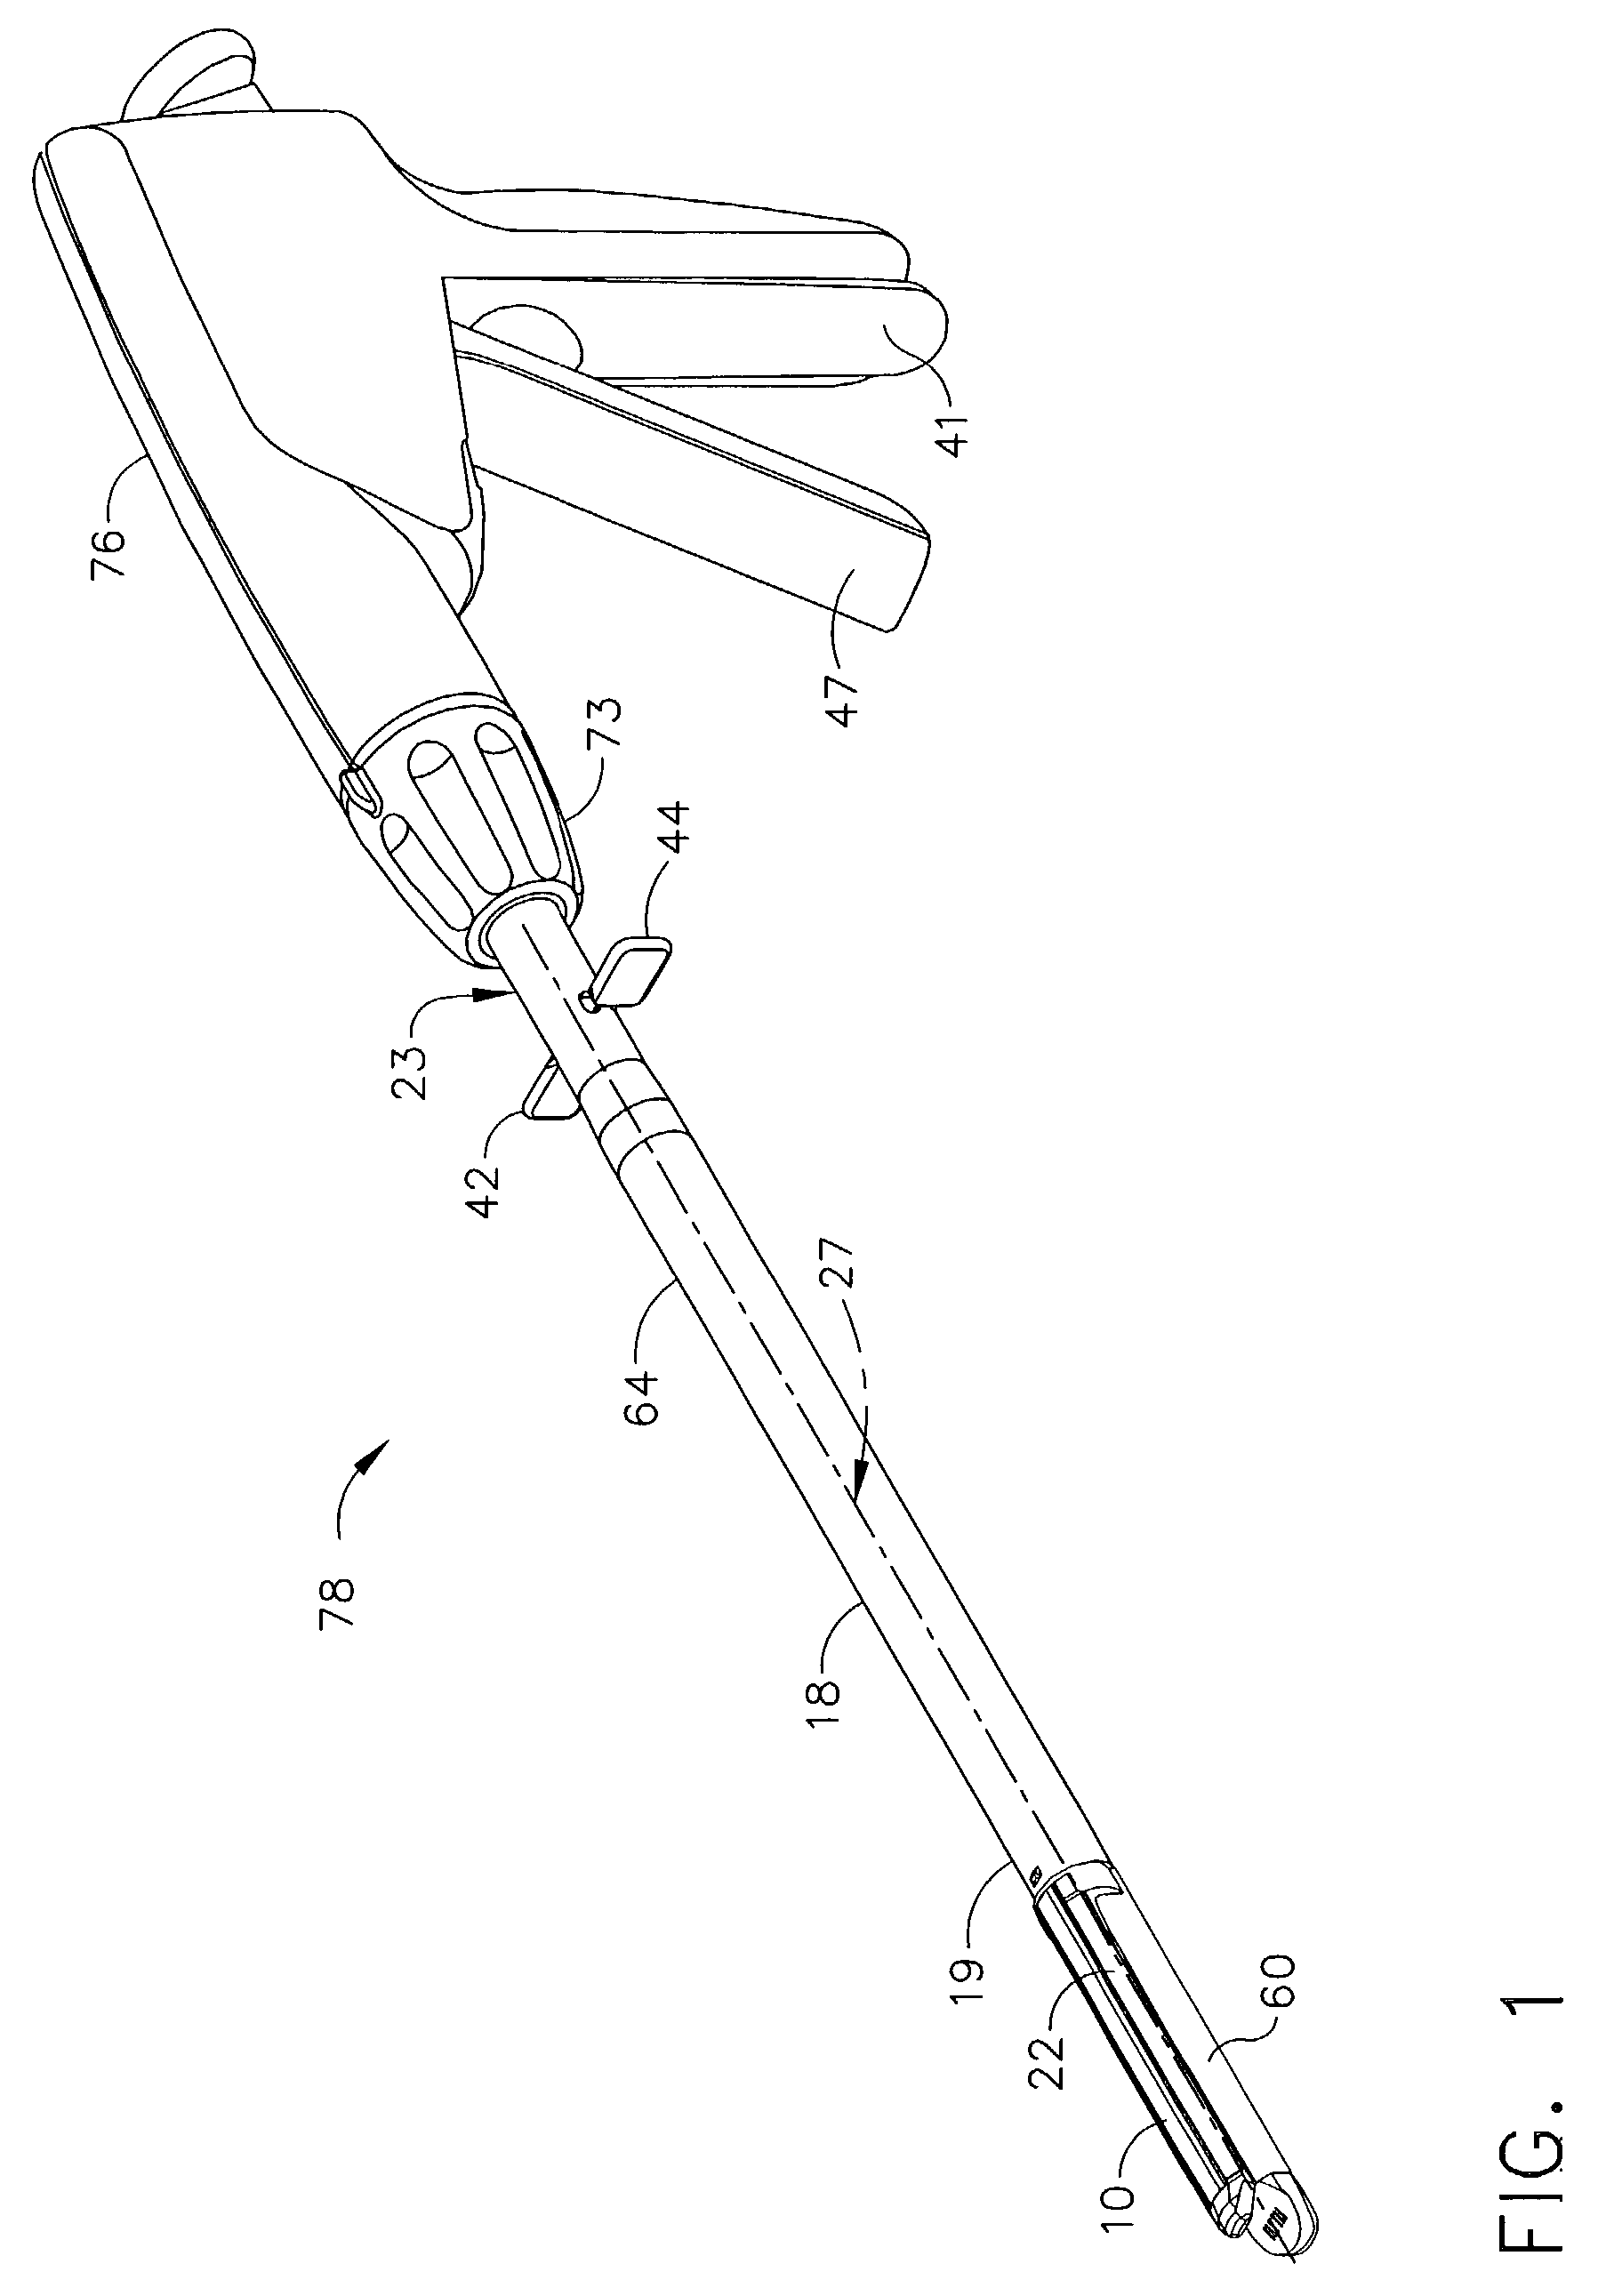 Surgical device with expandable member